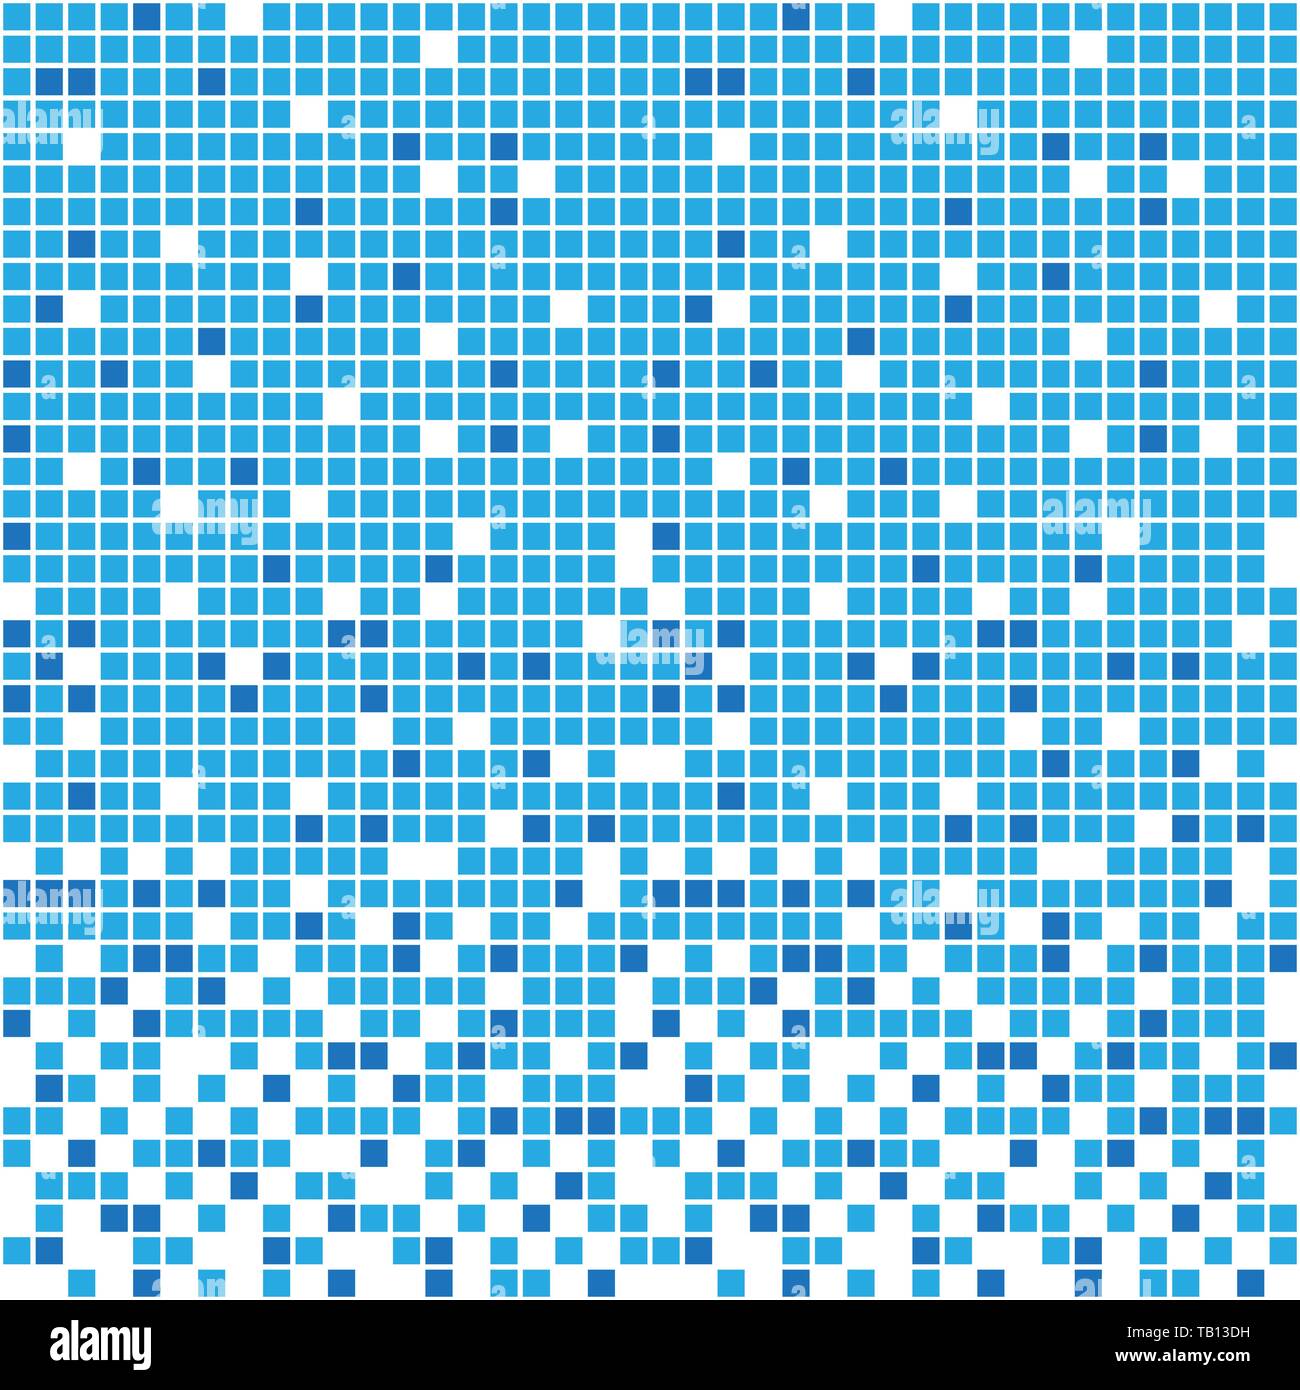 Blue fading pixel pattern. Vector illustration. Abstract pixel background. Stock Vector